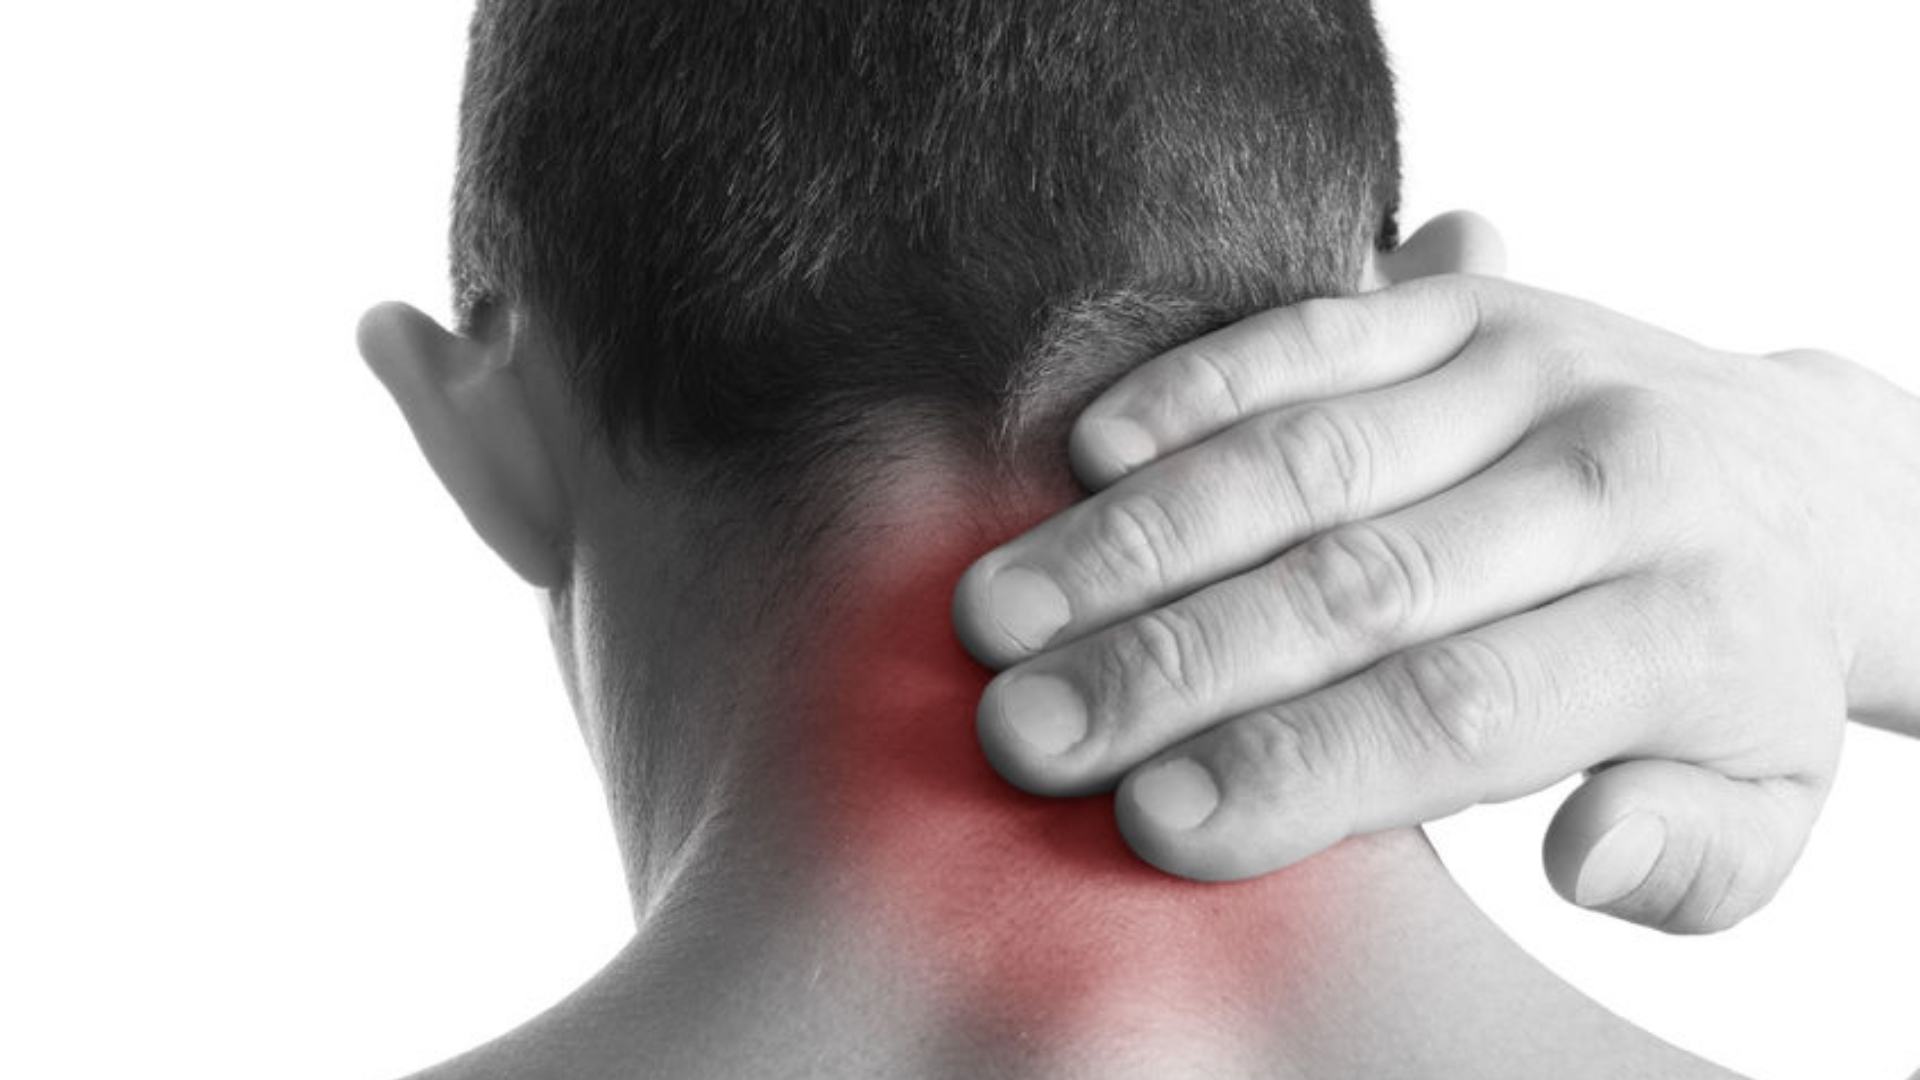 You are currently viewing “NECK PAIN”- A Major Health Issue in Youngsters